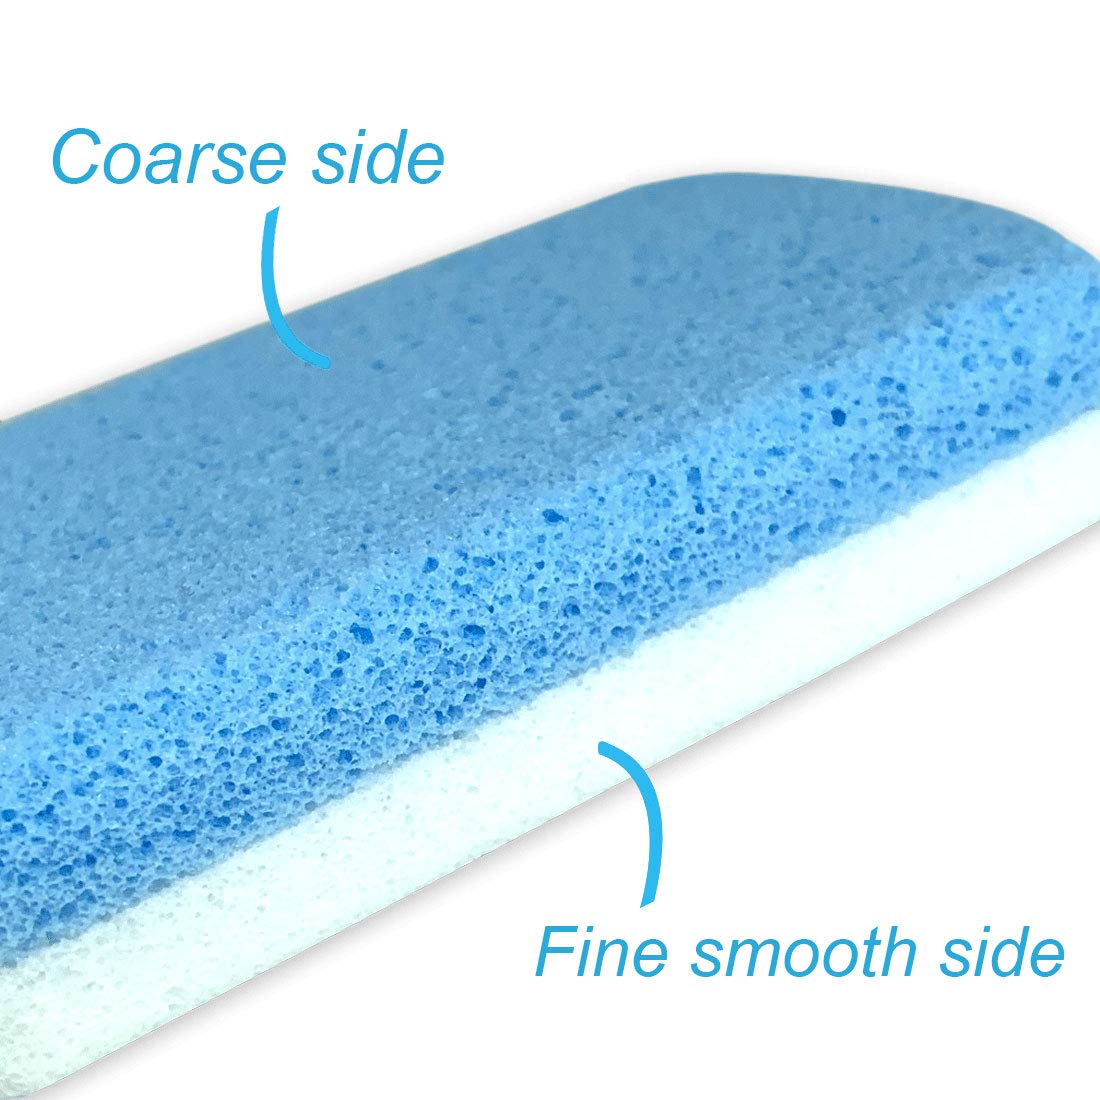 Glass Pumice Stone for Feet, Callus Remover and Foot scrubber & Pedicure Exfoliator Tool